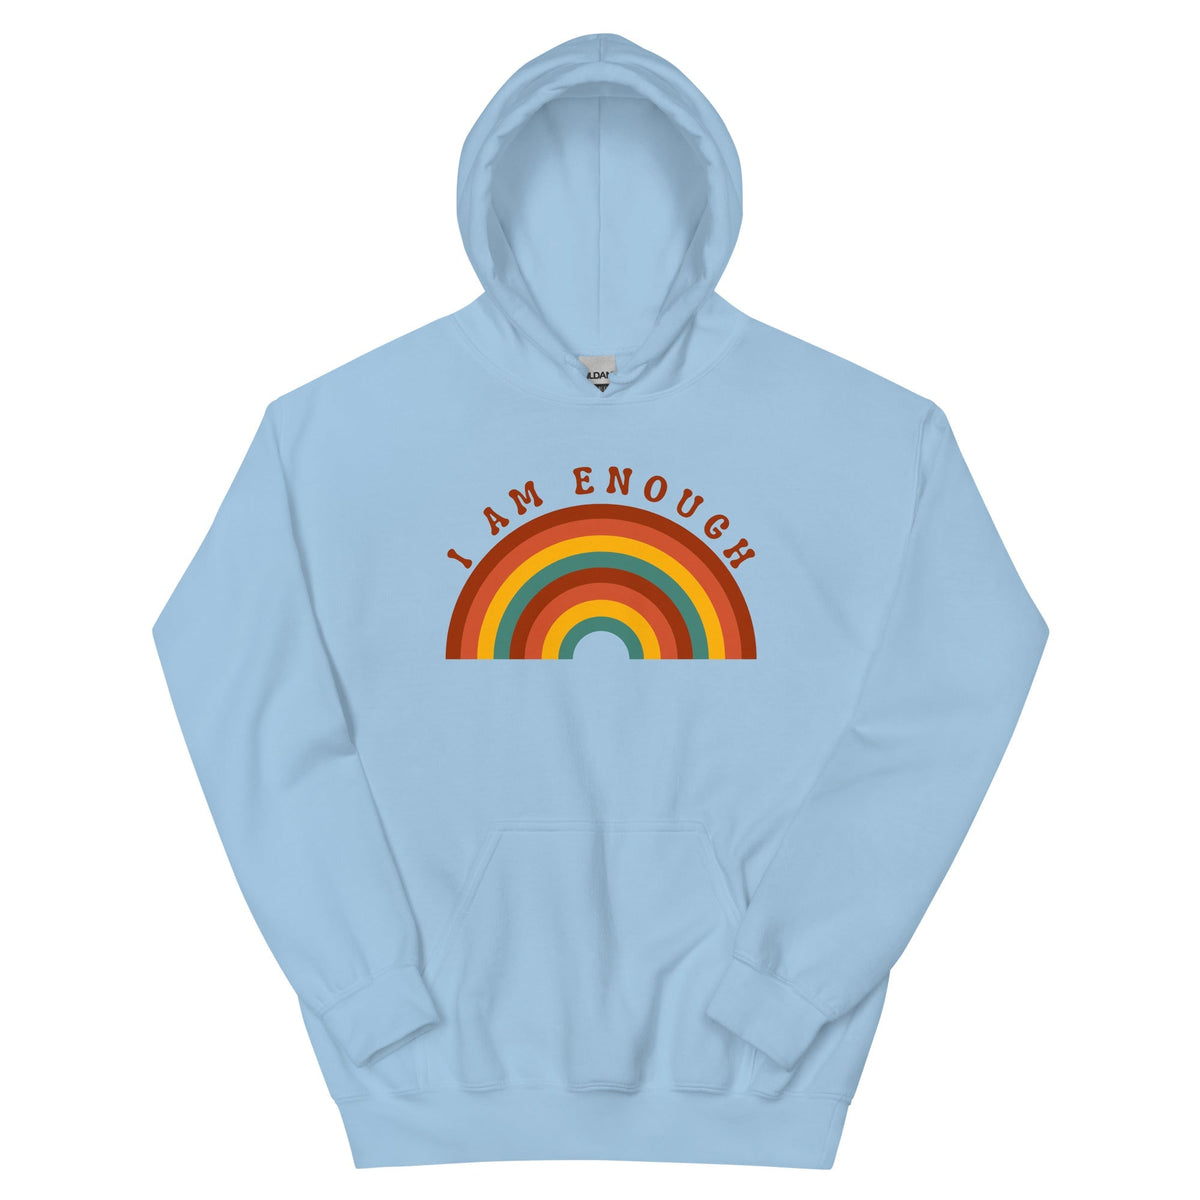 I AM ENOUGH RAINBOW - Motivational Hoodie for Men - 5